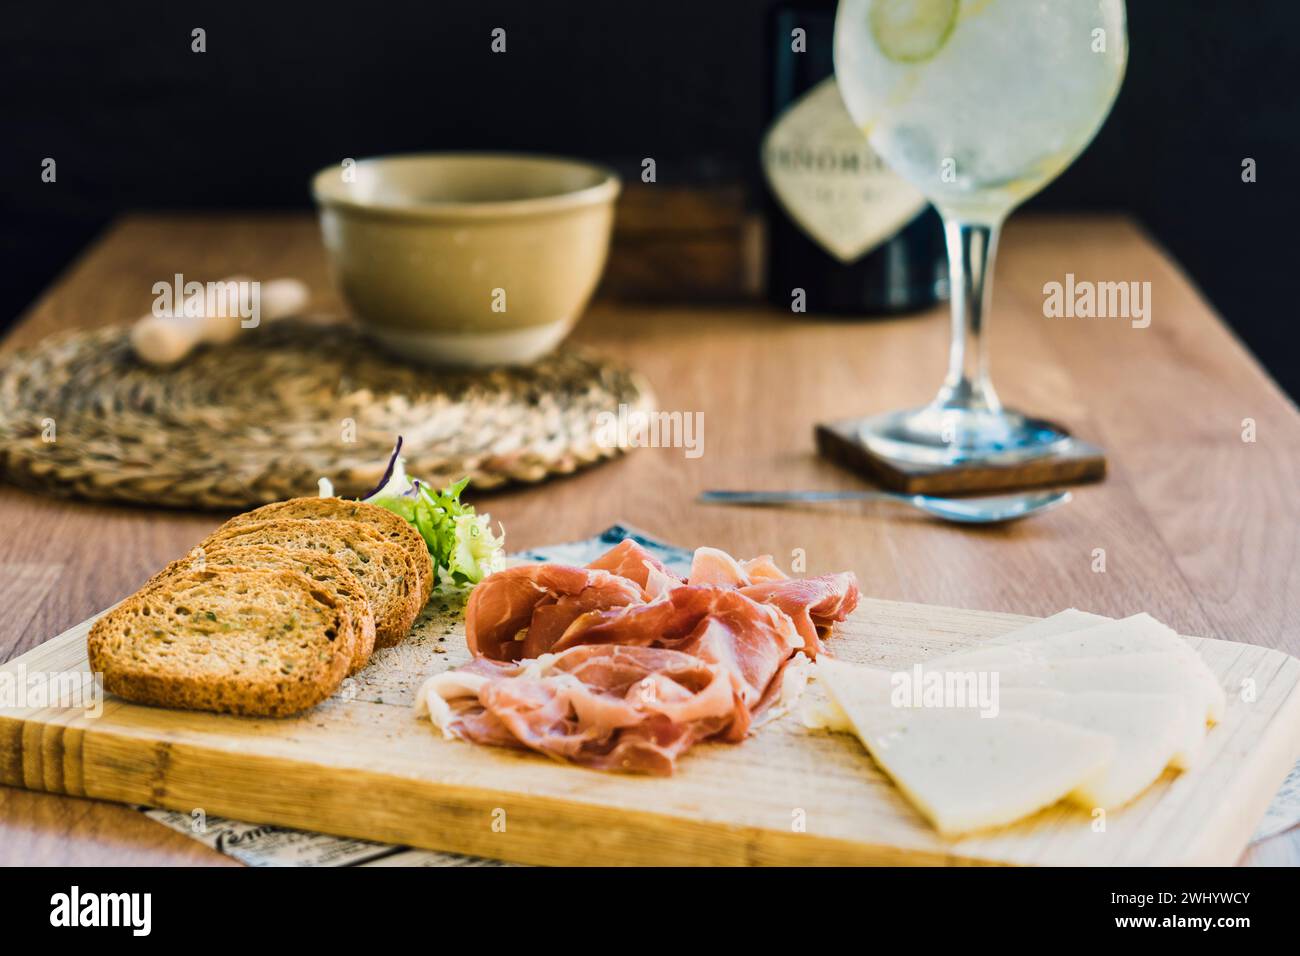 An assortment of meats, bread, and beverages on a table, Italian aperitif Stock Photo